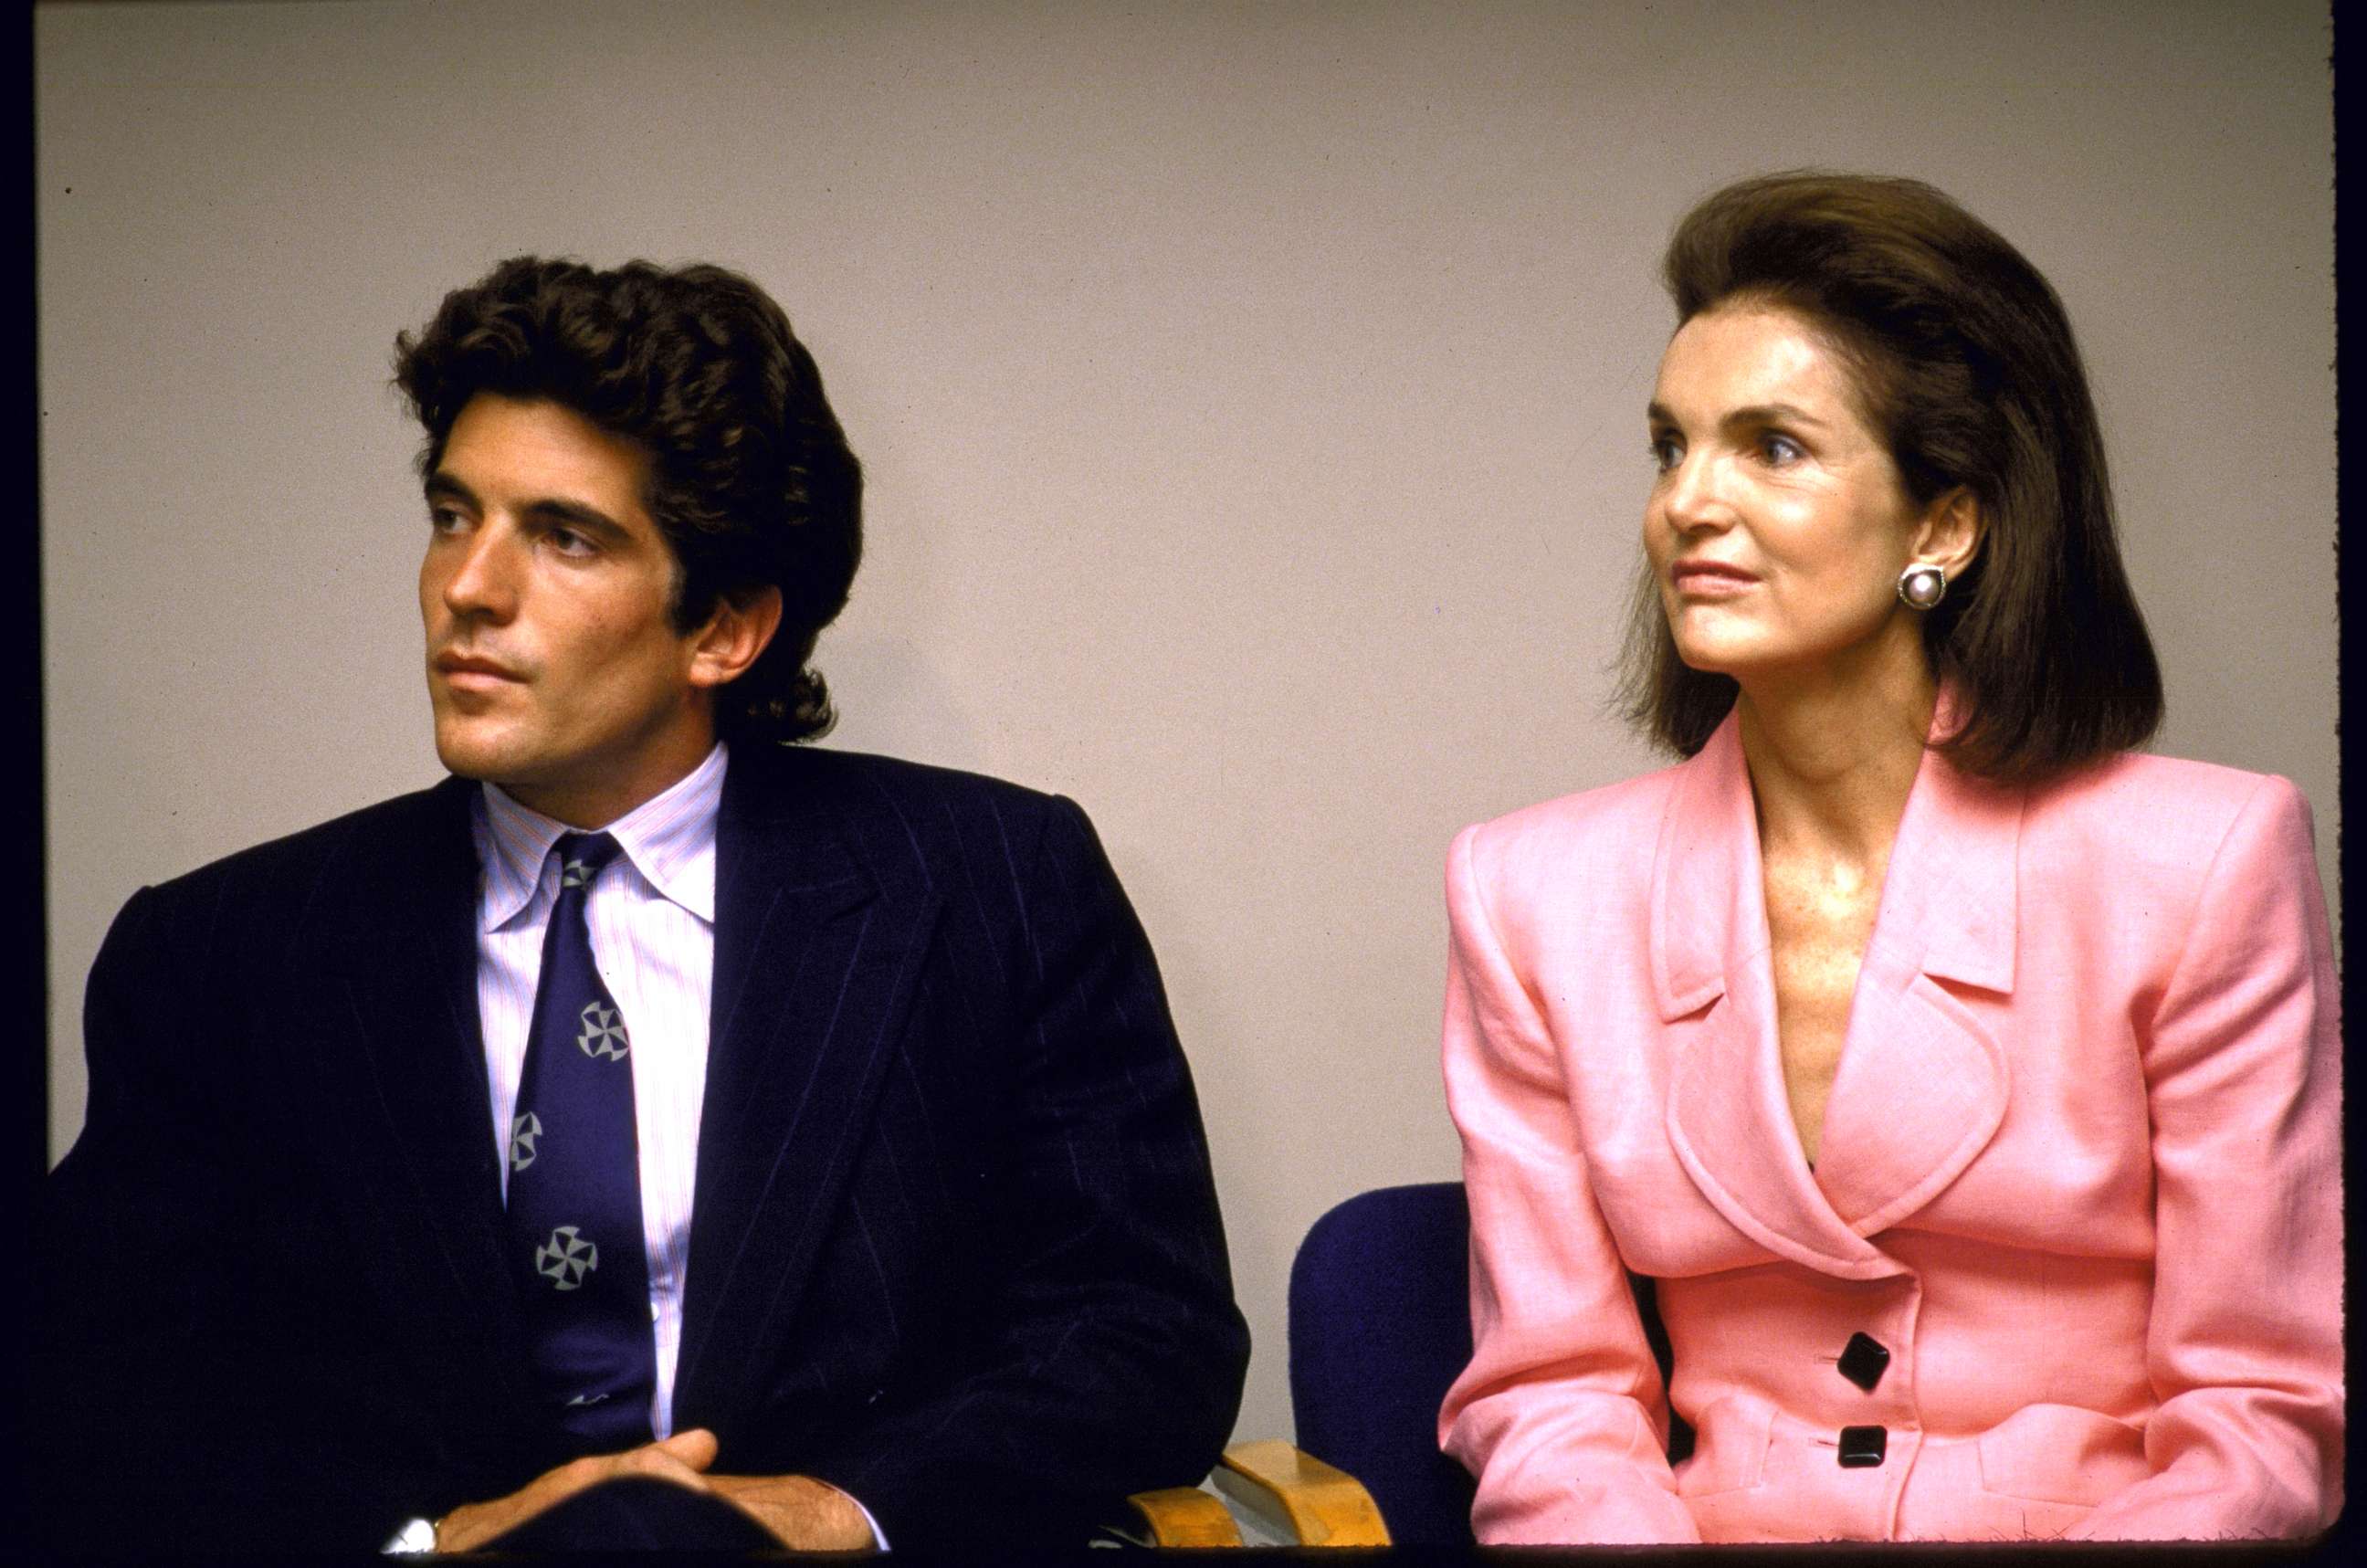 PHOTO: John F. Kennedy Jr. and his mother, former first lady Jackie Kennedy Onassis.